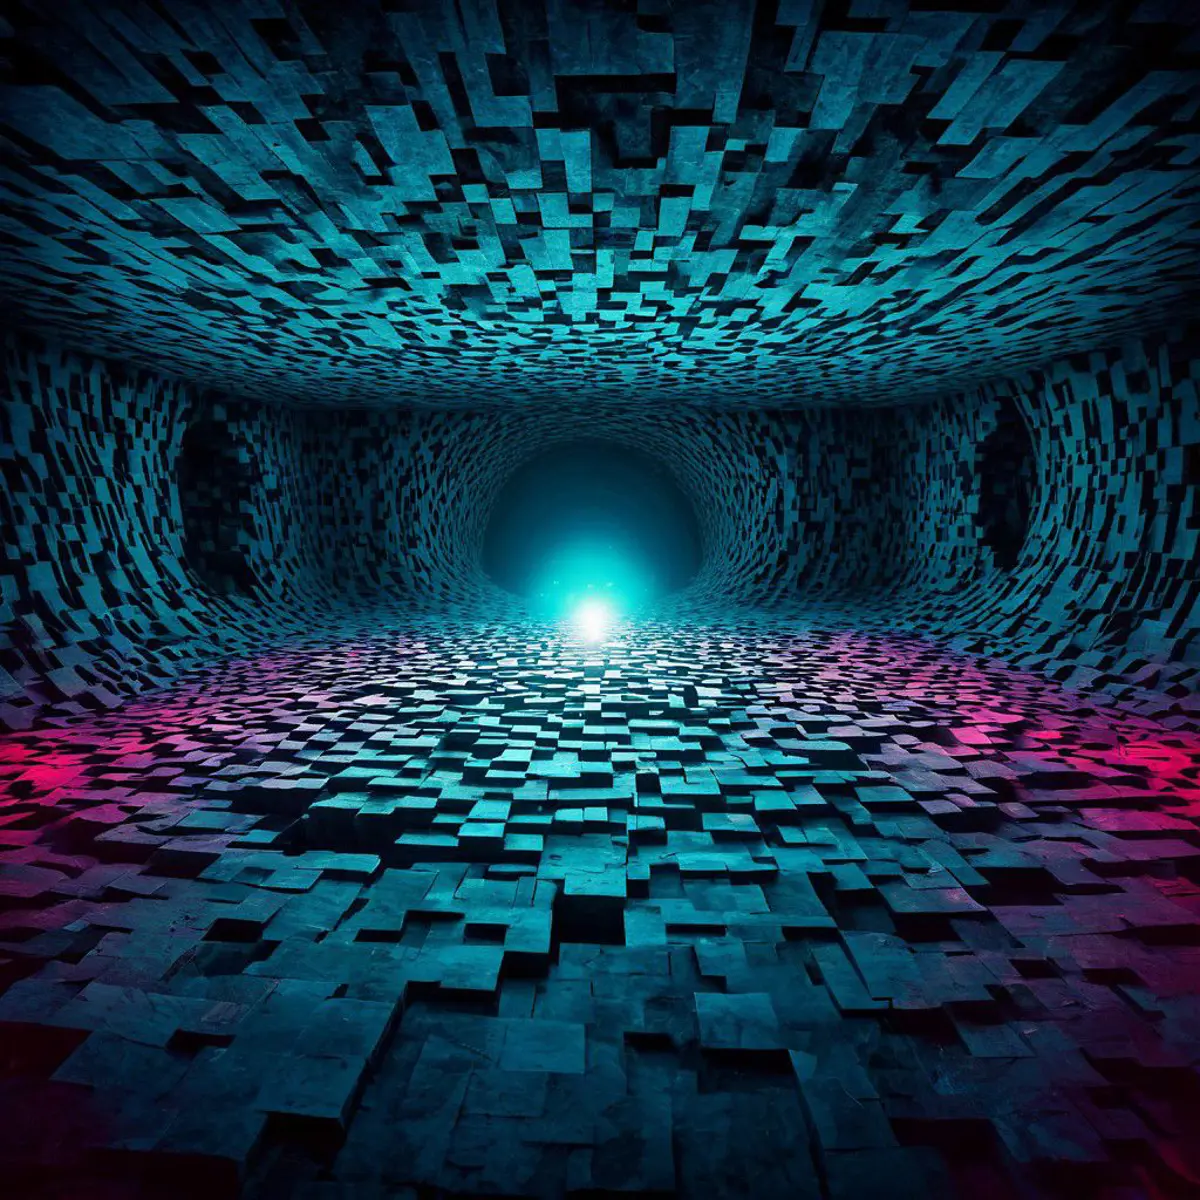 A tunnel-like structure composed of numerous cubic shapes that recede into the distance, where a bright light glows at the far end. The cubes are arranged in a seemingly random pattern, creating an intricate mosaic that covers the walls, ceiling, and floor of the tunnel. The lighting transitions from a cool blue at the entrance to a warm pink and red towards the edges, giving depth to the scene and enhancing its three-dimensional appearance.